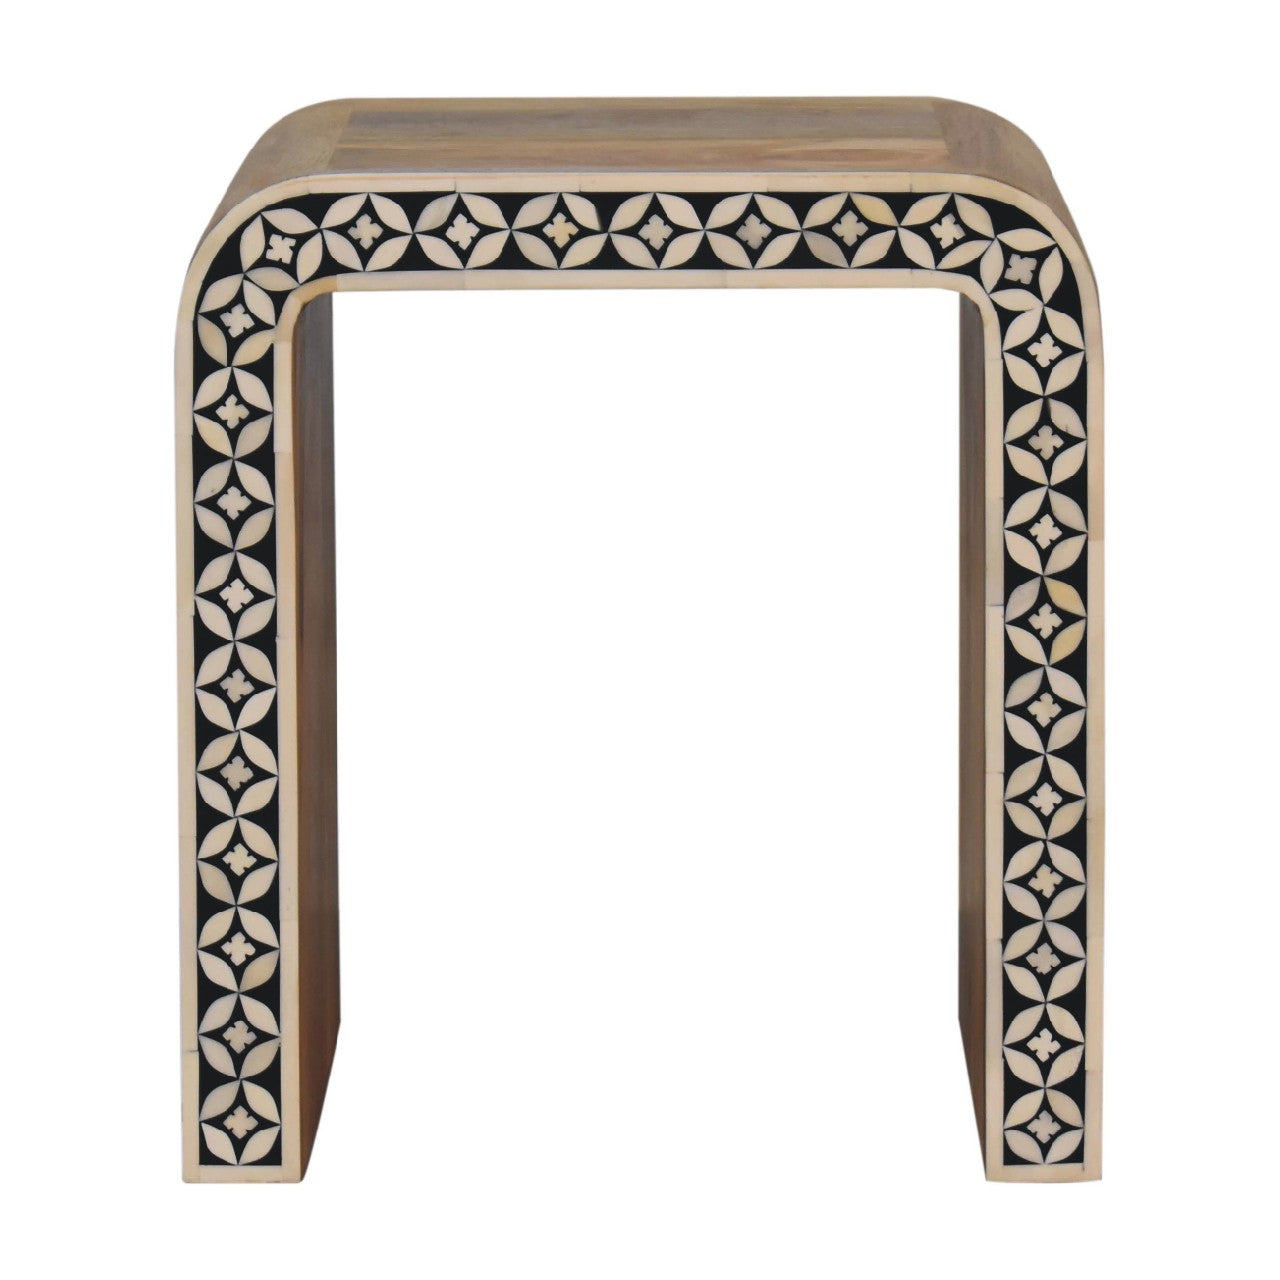 View Edessa Bone Inlay End Table information